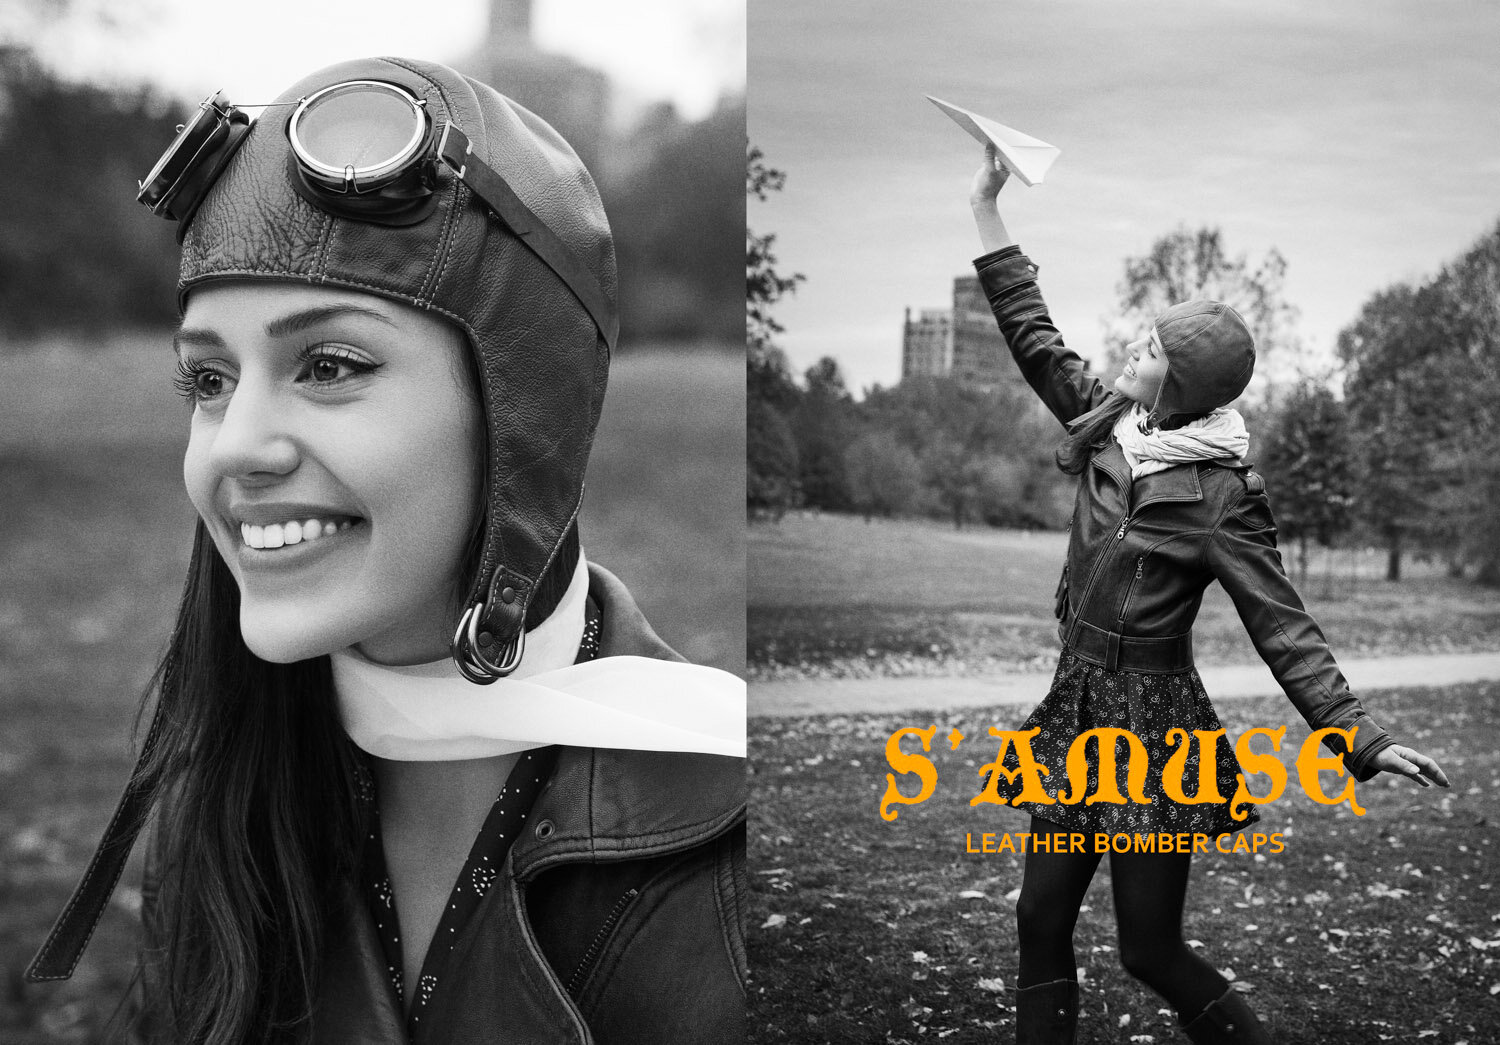 fun aviation themed product shoot for S'AMUSE leather bomber caps